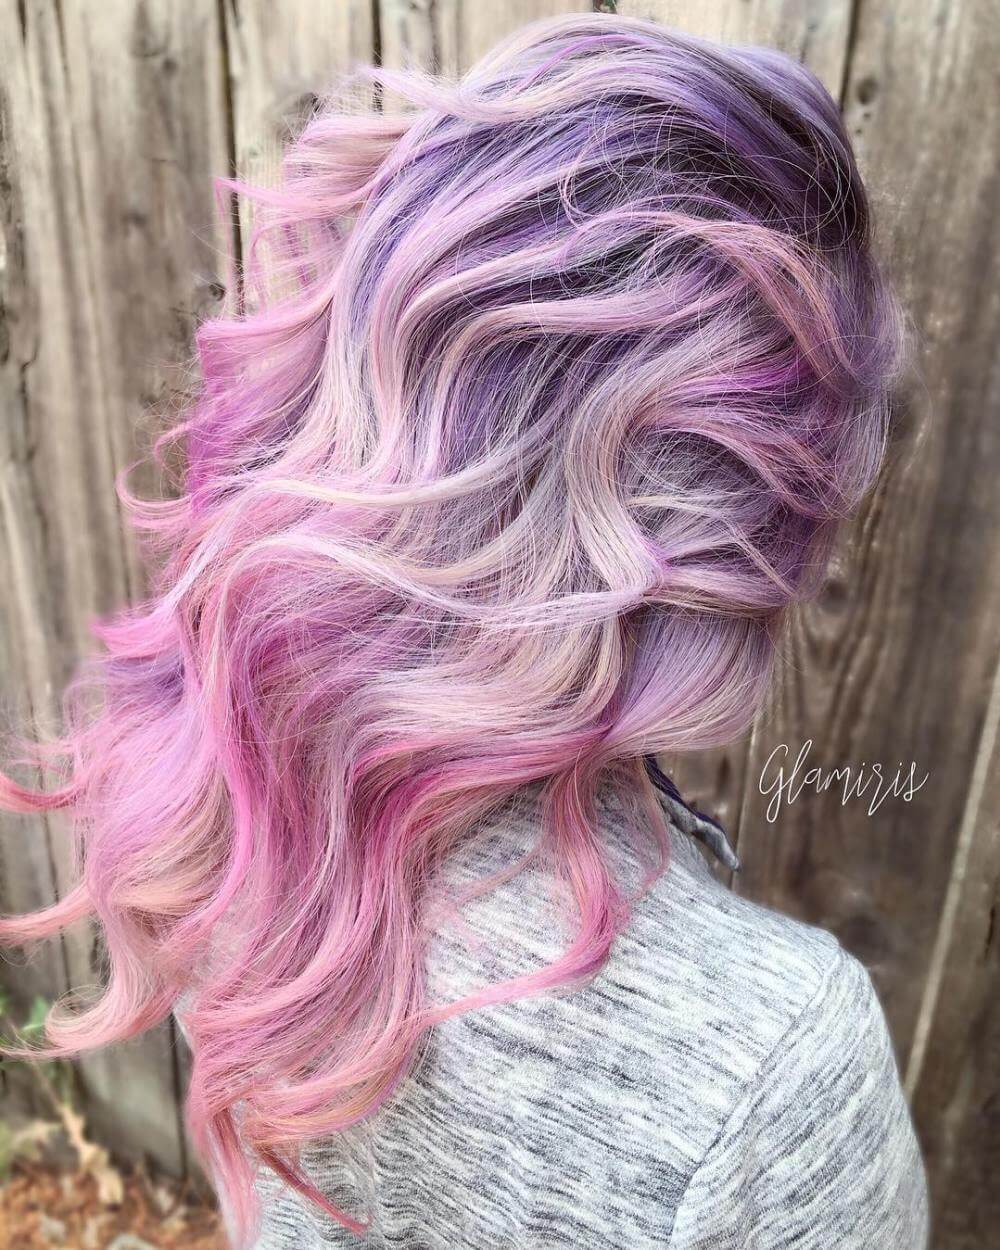 35 Cotton Candy Hair Styles That Look So Good You'll Want To Taste Them